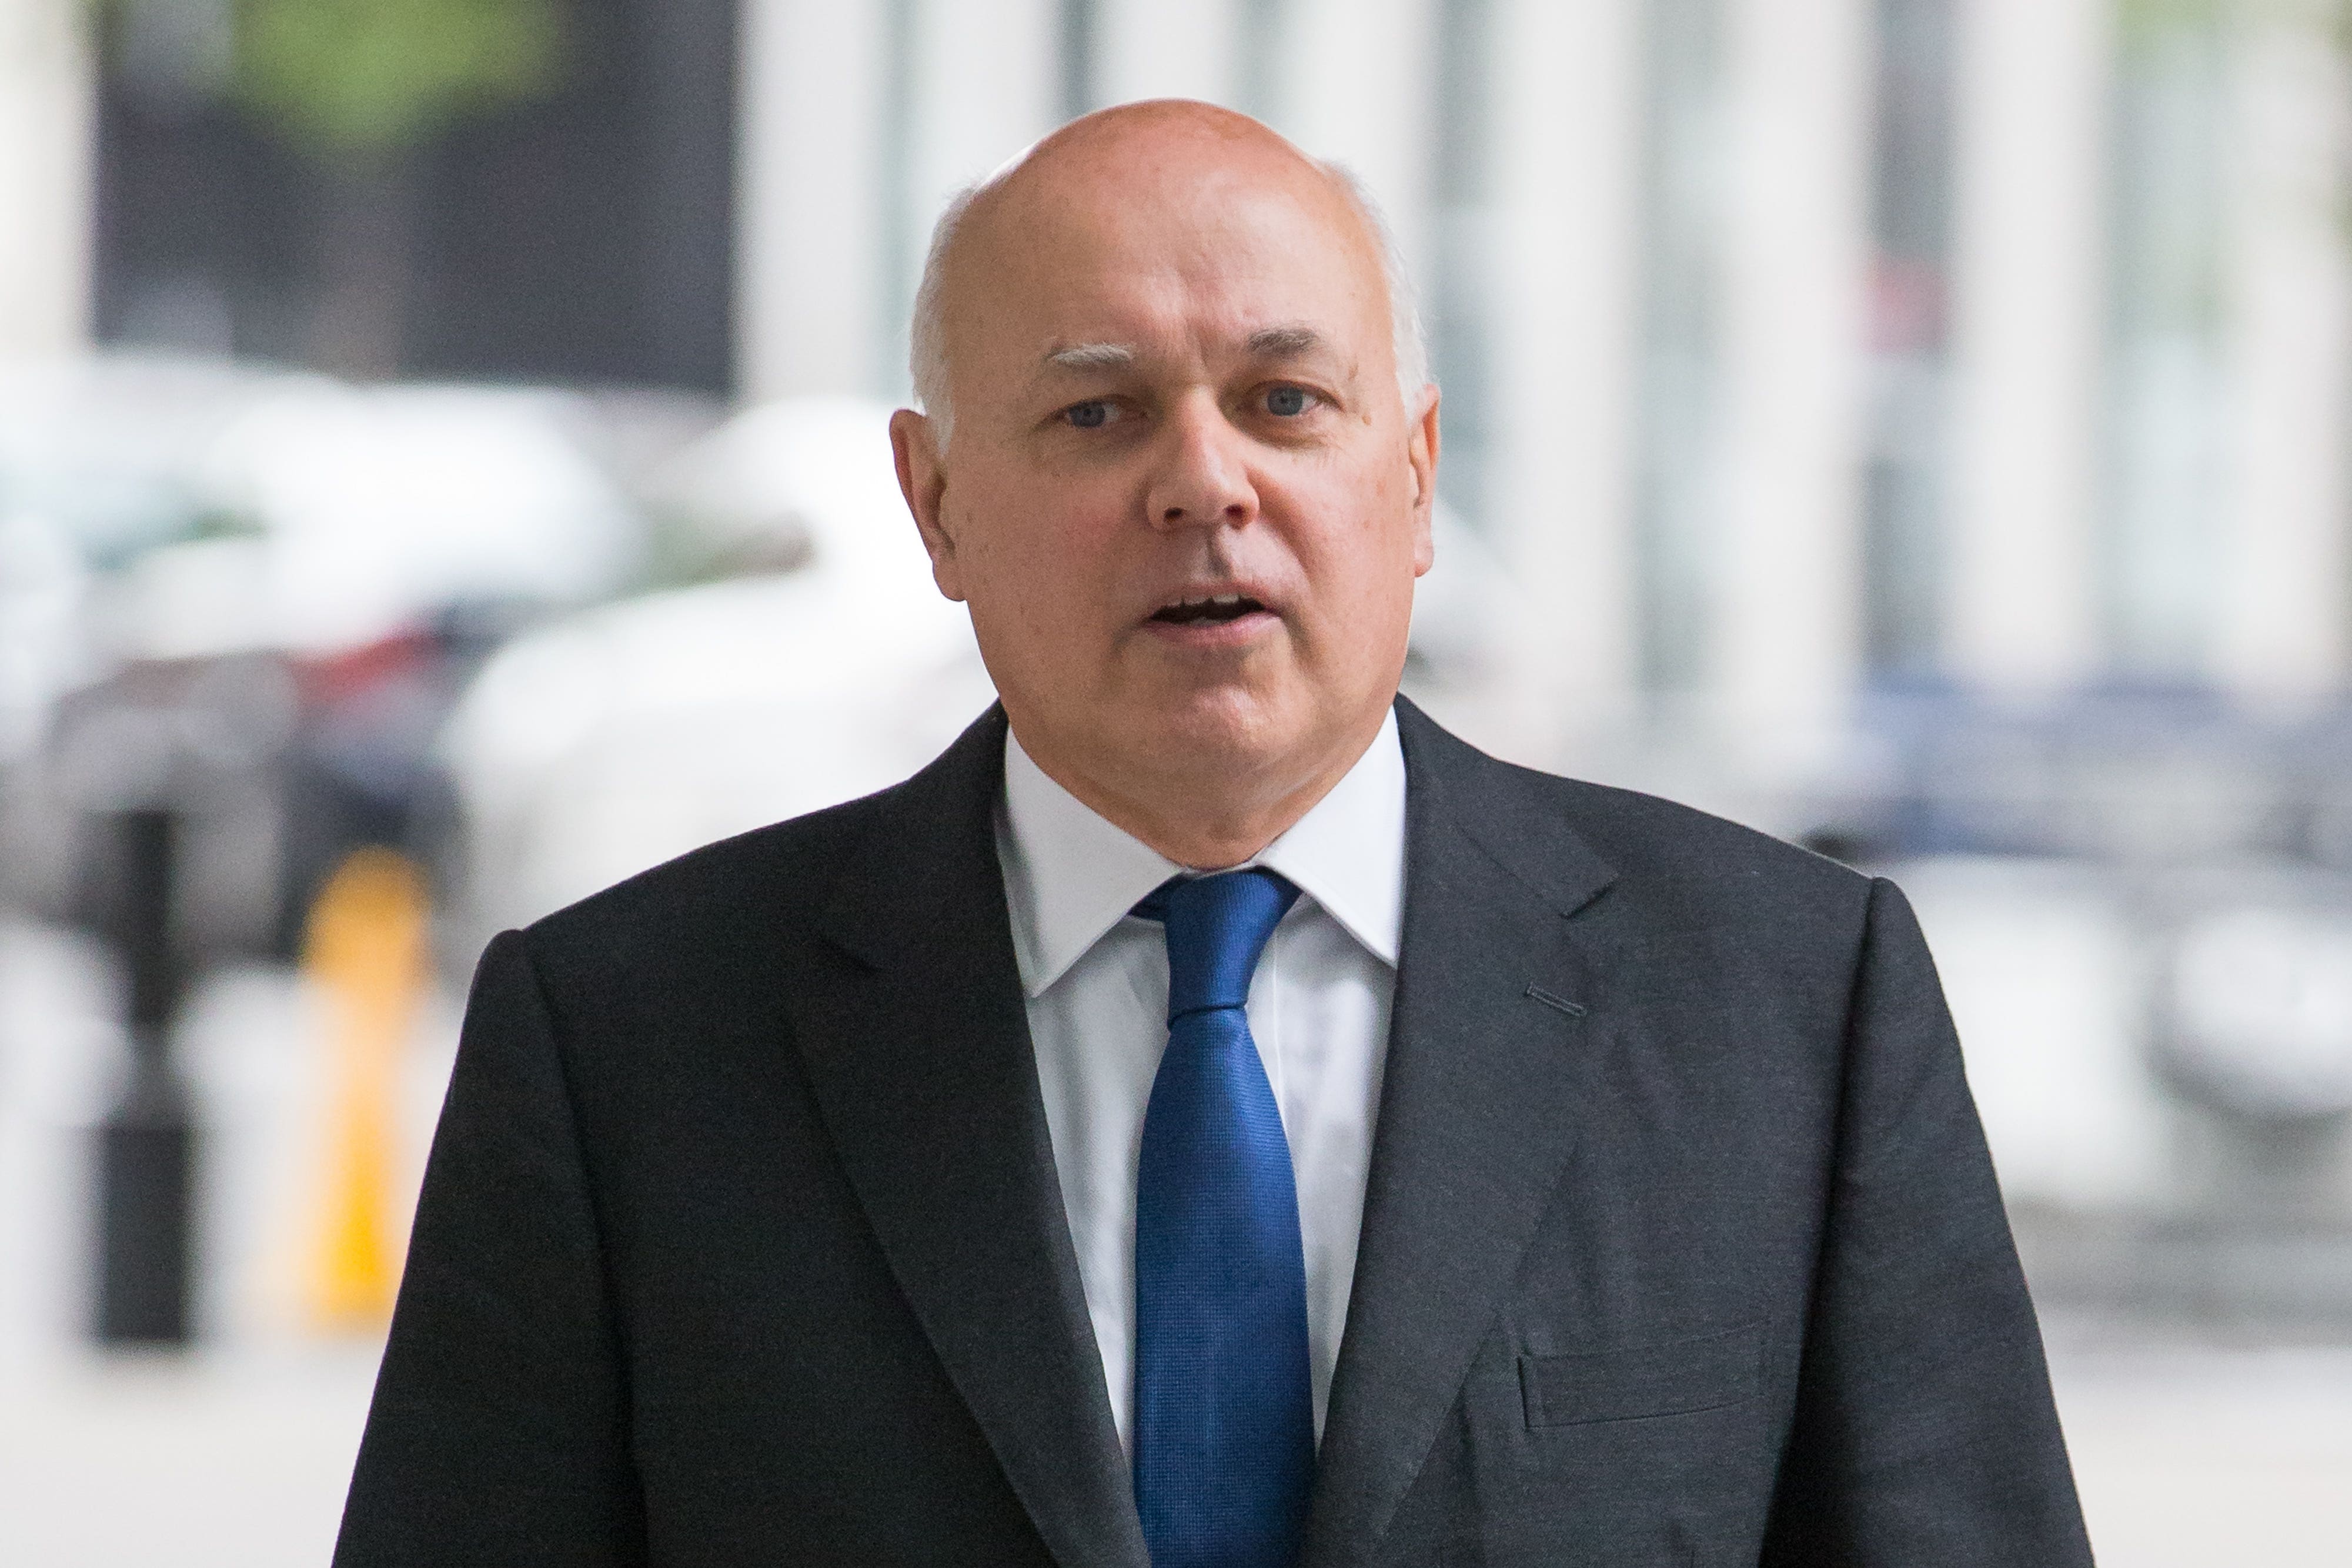 Sir Iain Duncan Smith has called for China to be deemed ‘threat’